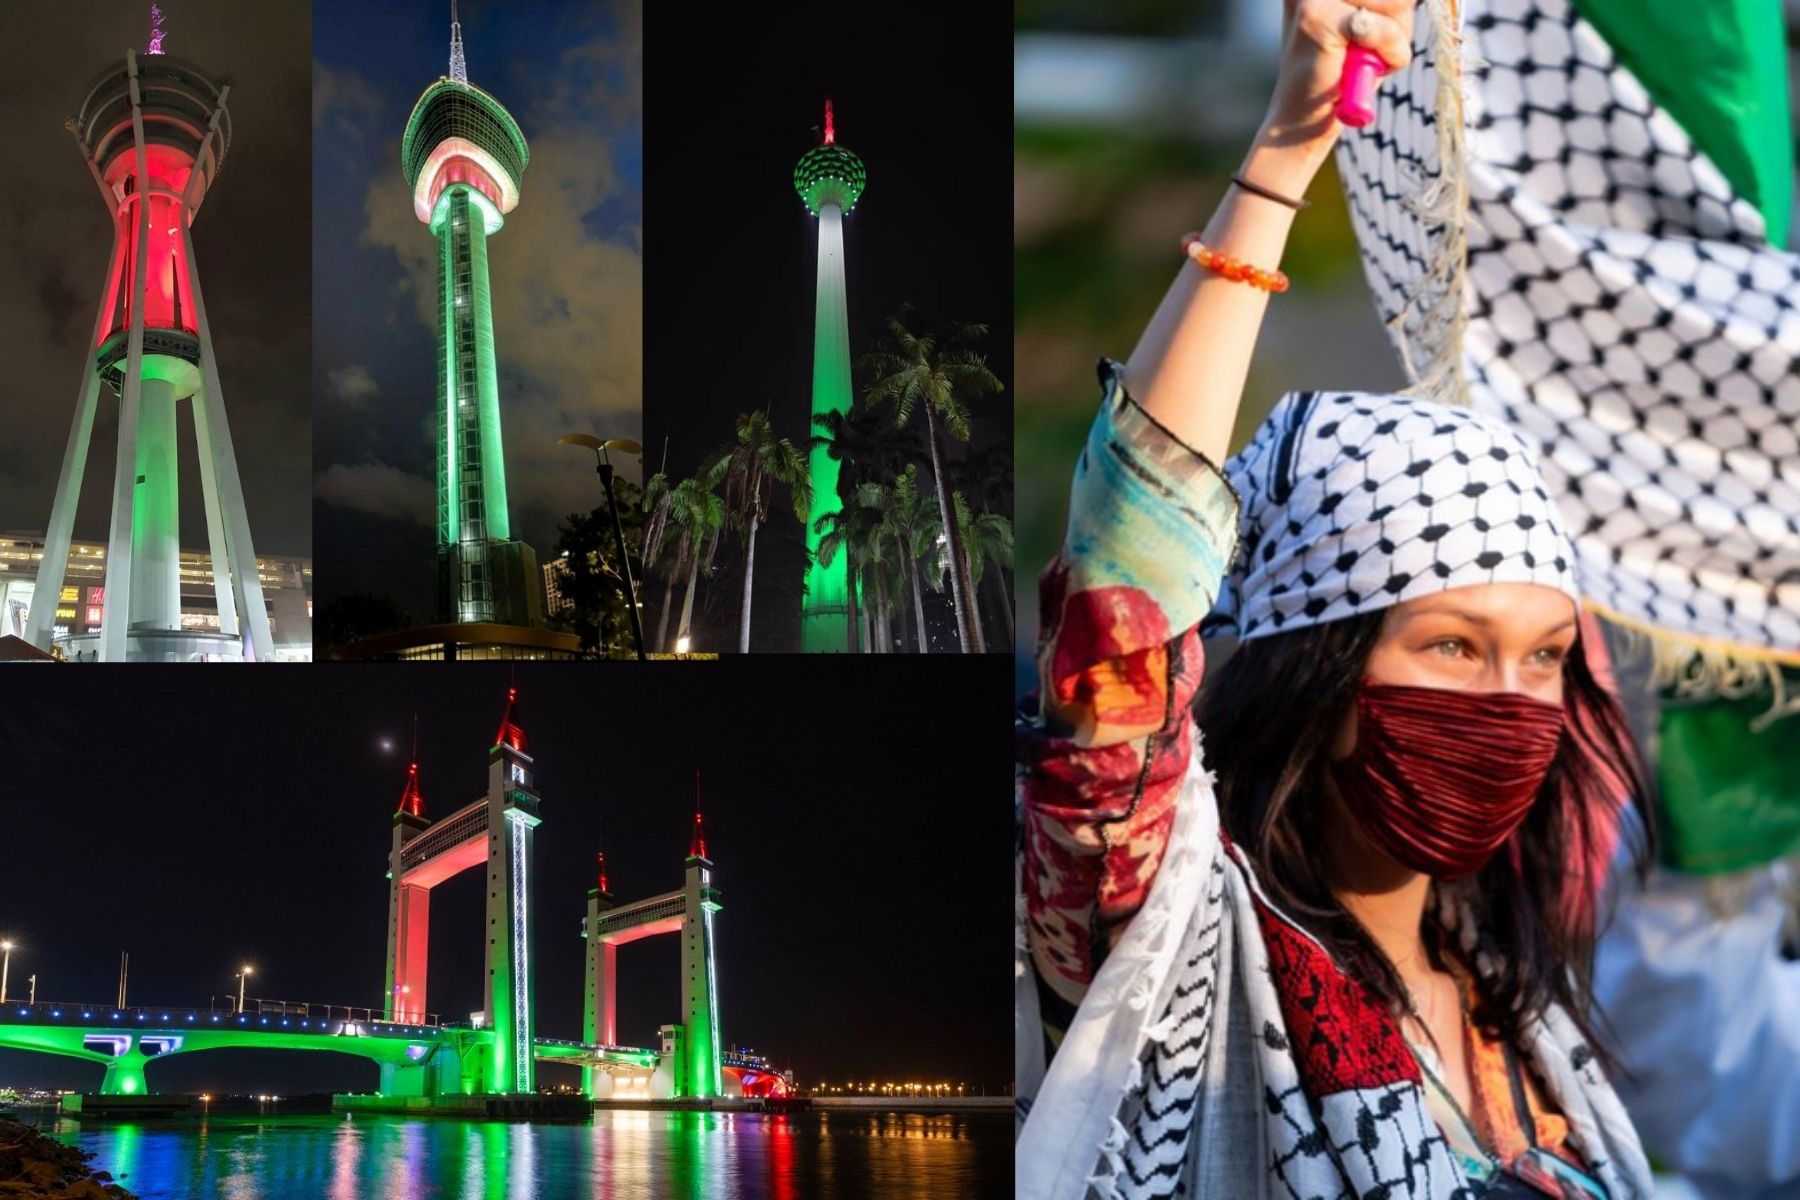 KL Tower, Kuantan Tower 188, Alor Setar Tower, and Terengganu Drawbridge illuminated in red, black, white, and green until the end of the week.